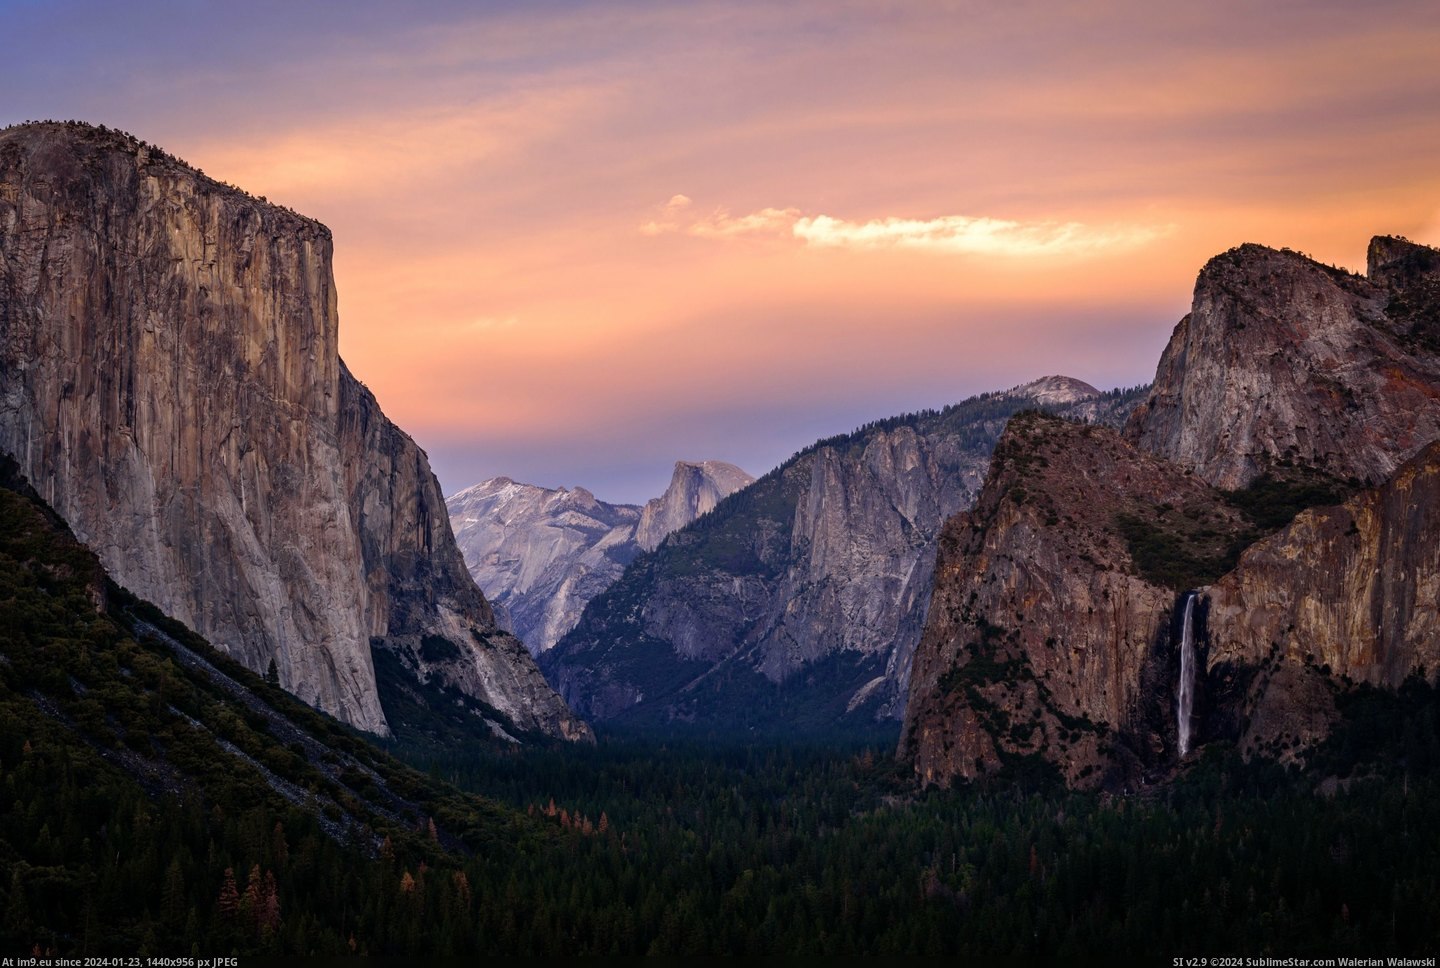 #Park #National #Usa #Yosemite #Tunnel #California #Exposed [Earthporn] The Tunnel View at Yosemite National Park, California, USA [5295x3535] Pic. (Obraz z album My r/EARTHPORN favs))